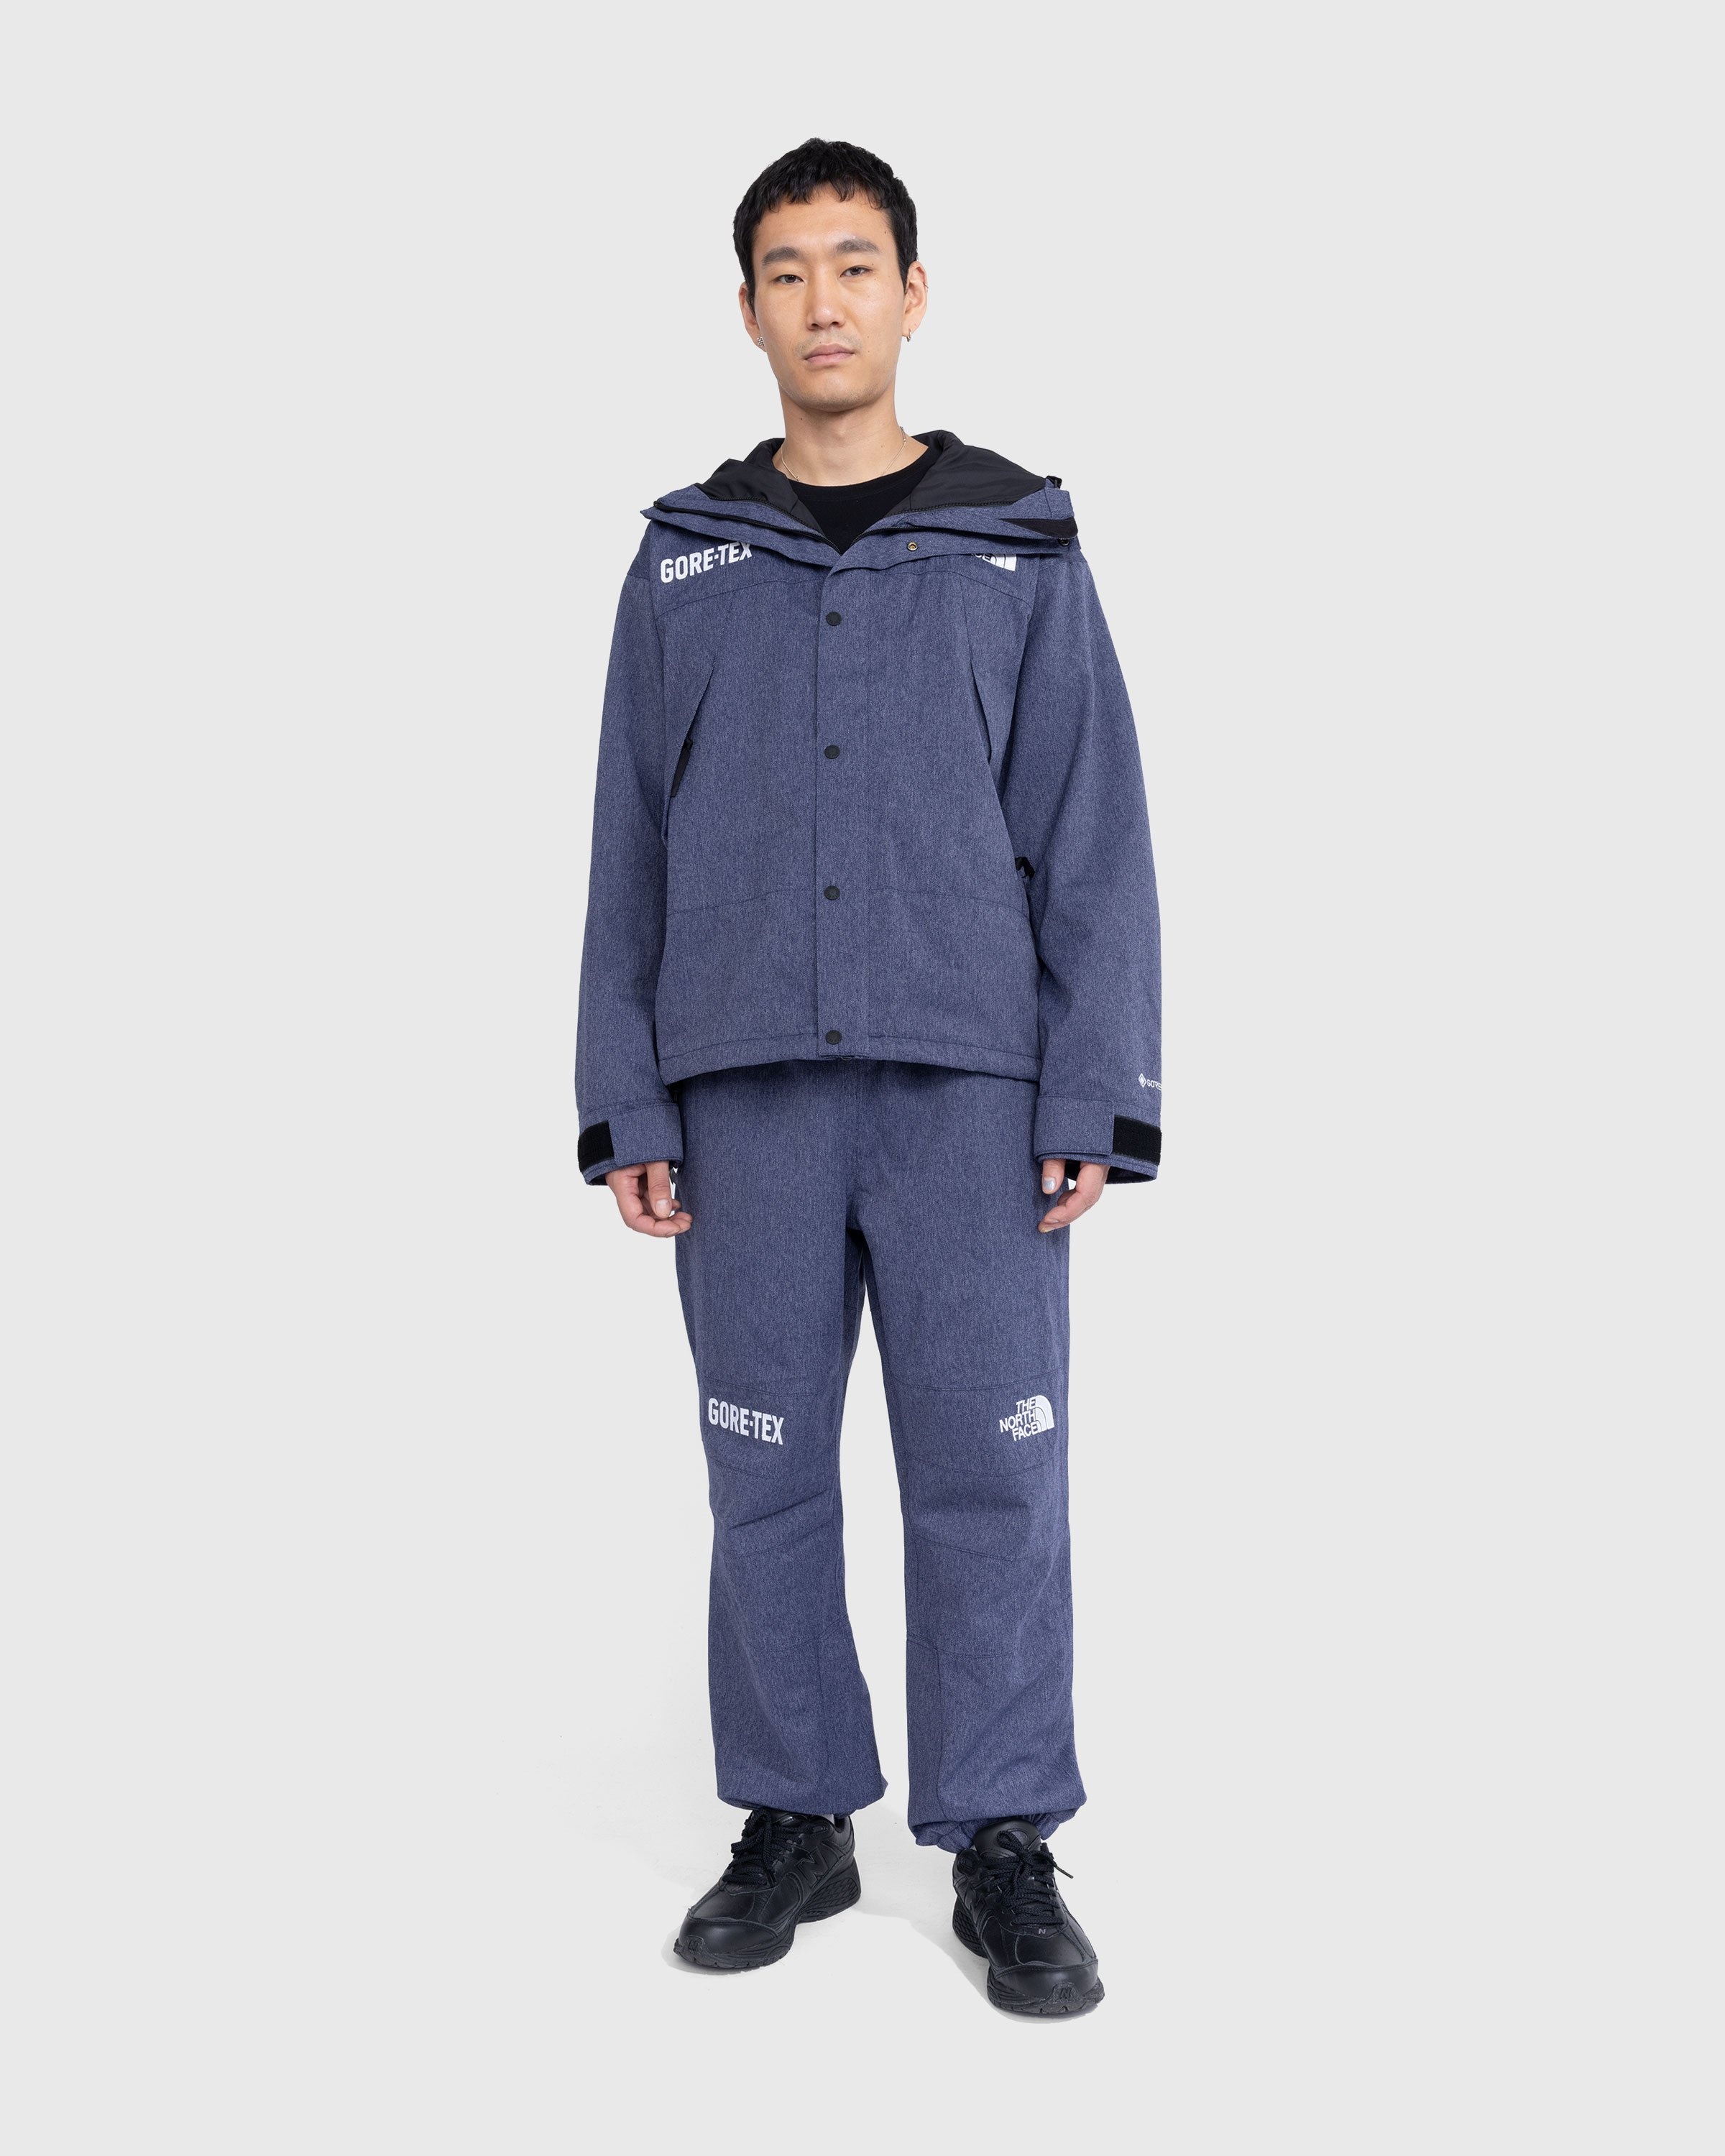 The North Face – GORE-TEX Mountain Jacket Denim Blue/TNF Black - Outerwear - Blue - Image 2